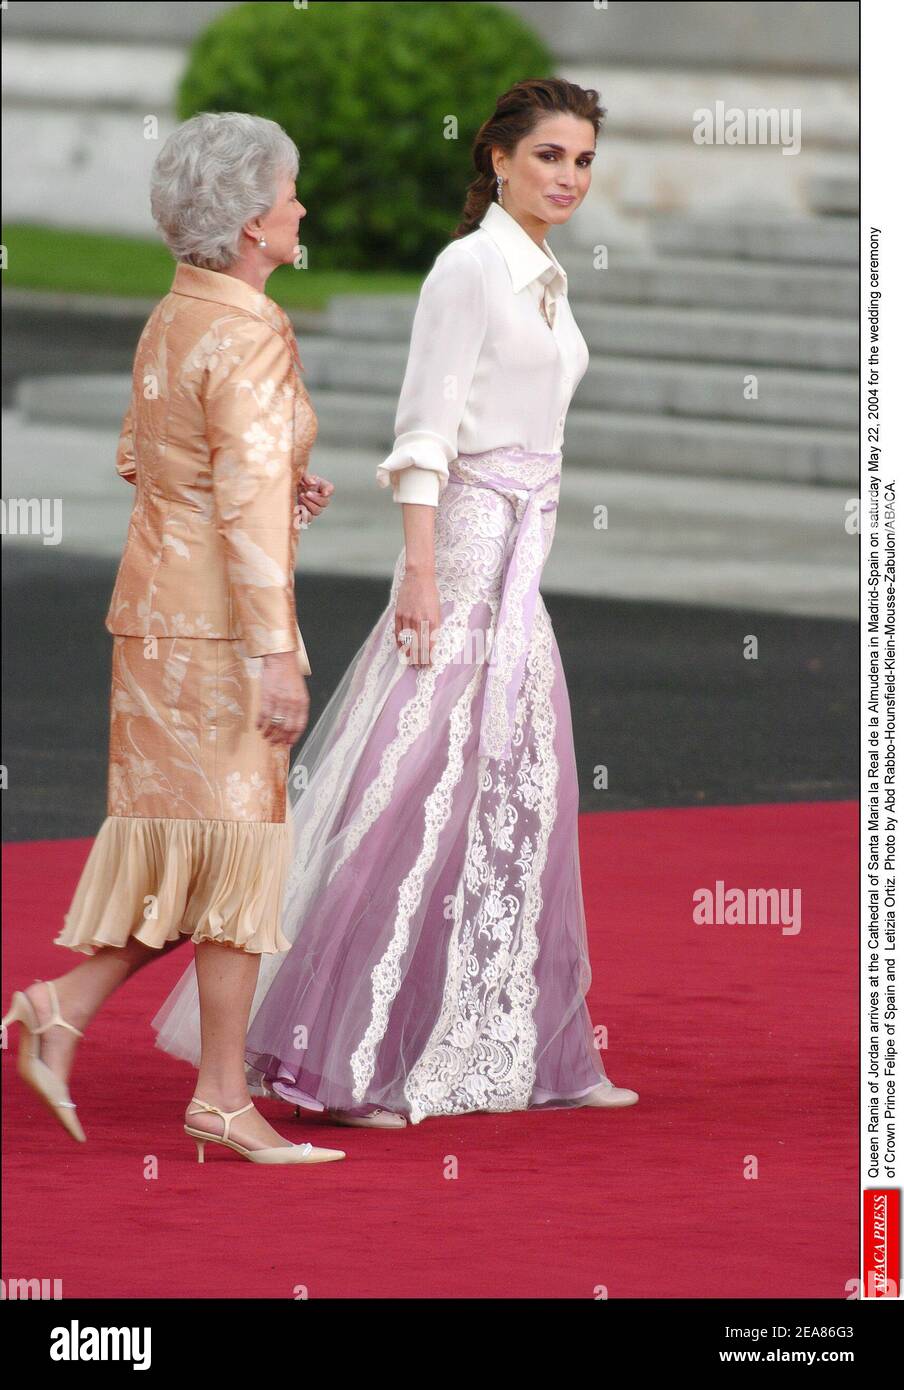 Queen Rania of Jordan and Princess Mona of Jordan arrive at the Cathedral of Santa Maria la Real de la Almudena in Madrid-Spain on saturday May 22, 2004 for the wedding ceremony of Crown Prince Felipe of Spain and Letizia Ortiz. Photo by Abd Rabbo-Hounsfield-Klein-Mousse-Zabulon/ABACA. Stock Photo